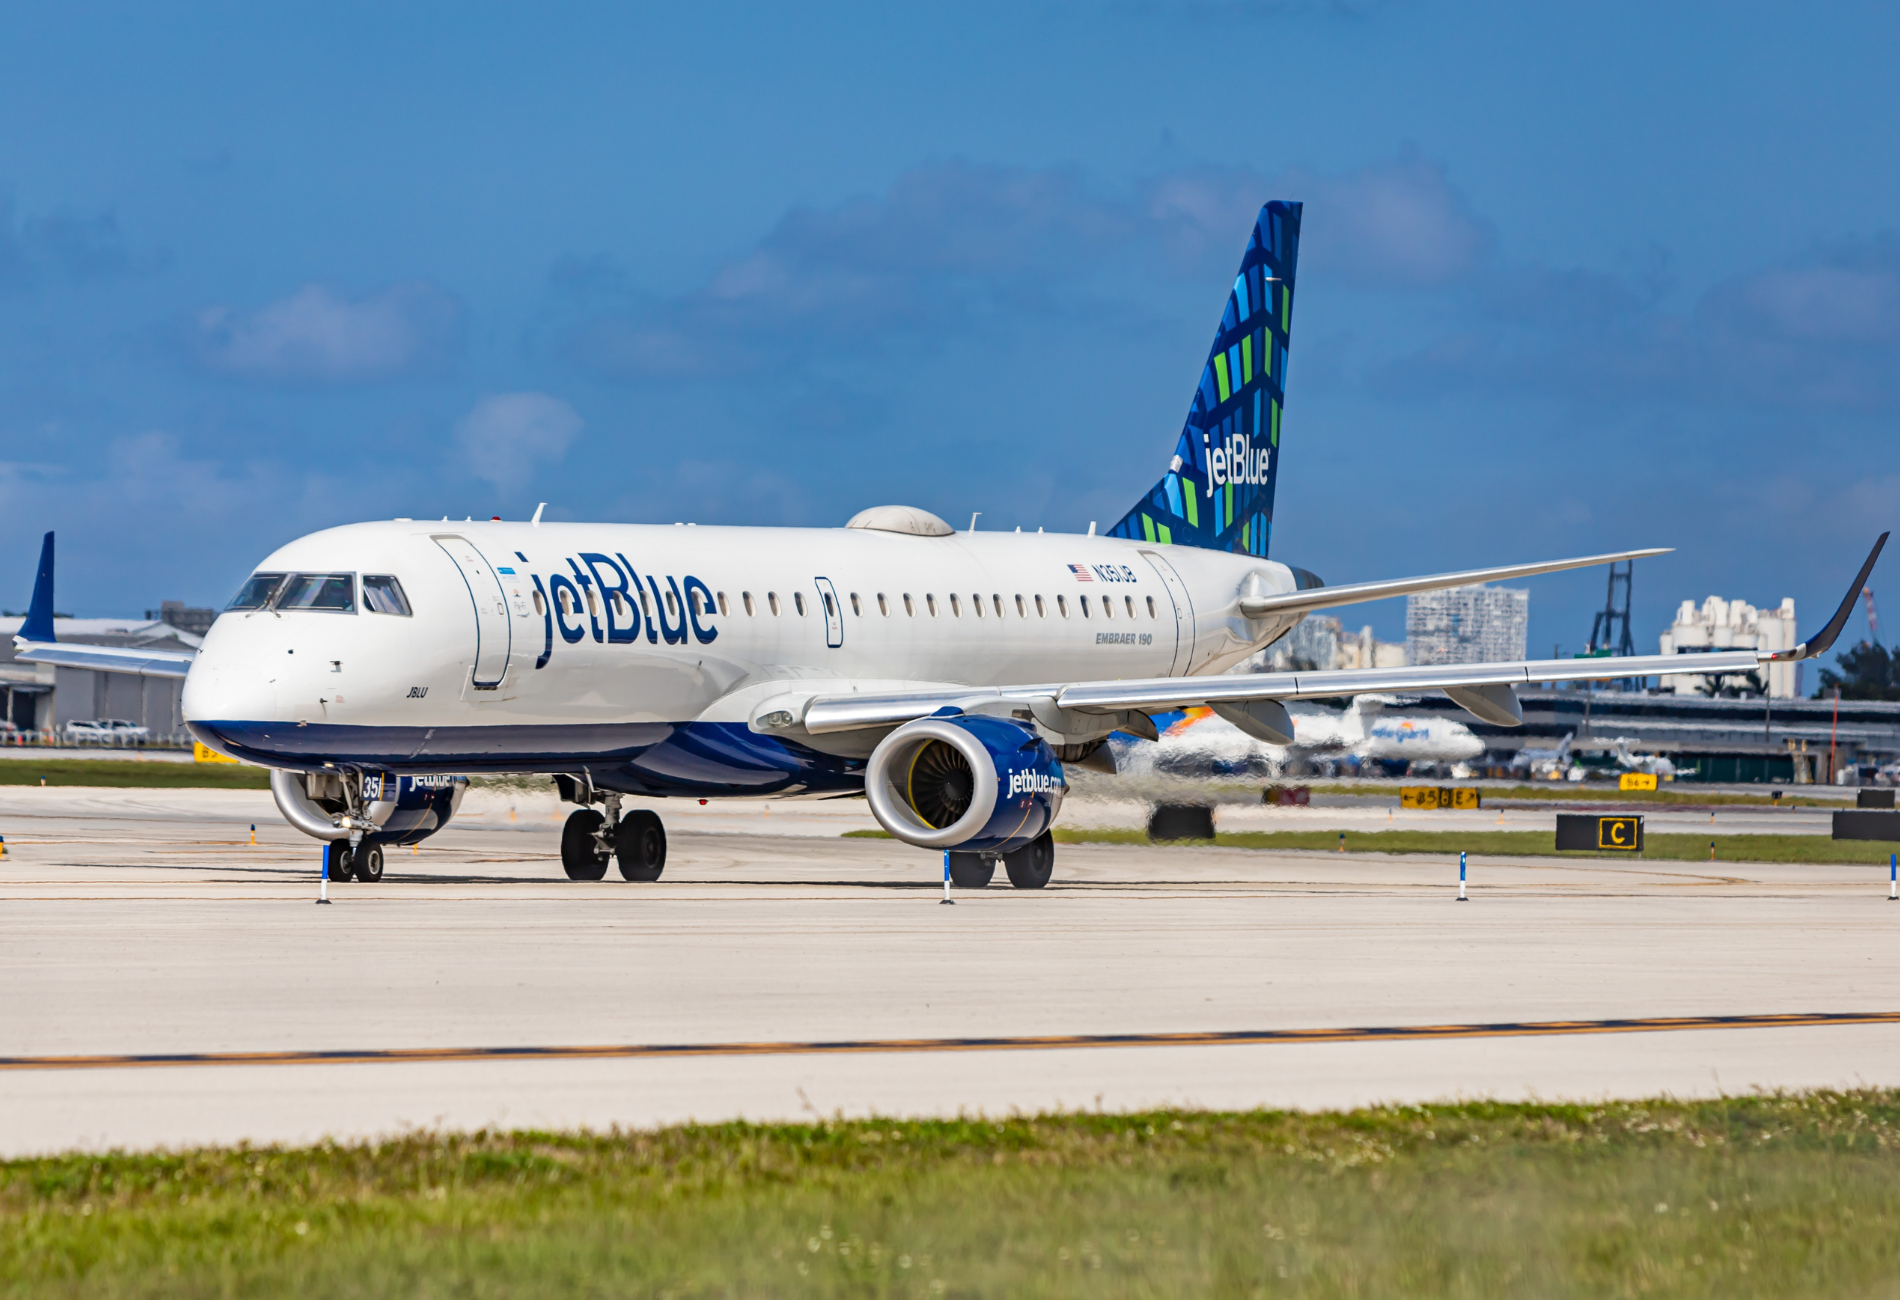 Picture of JetBlue airplane for news on the JetBlue sale